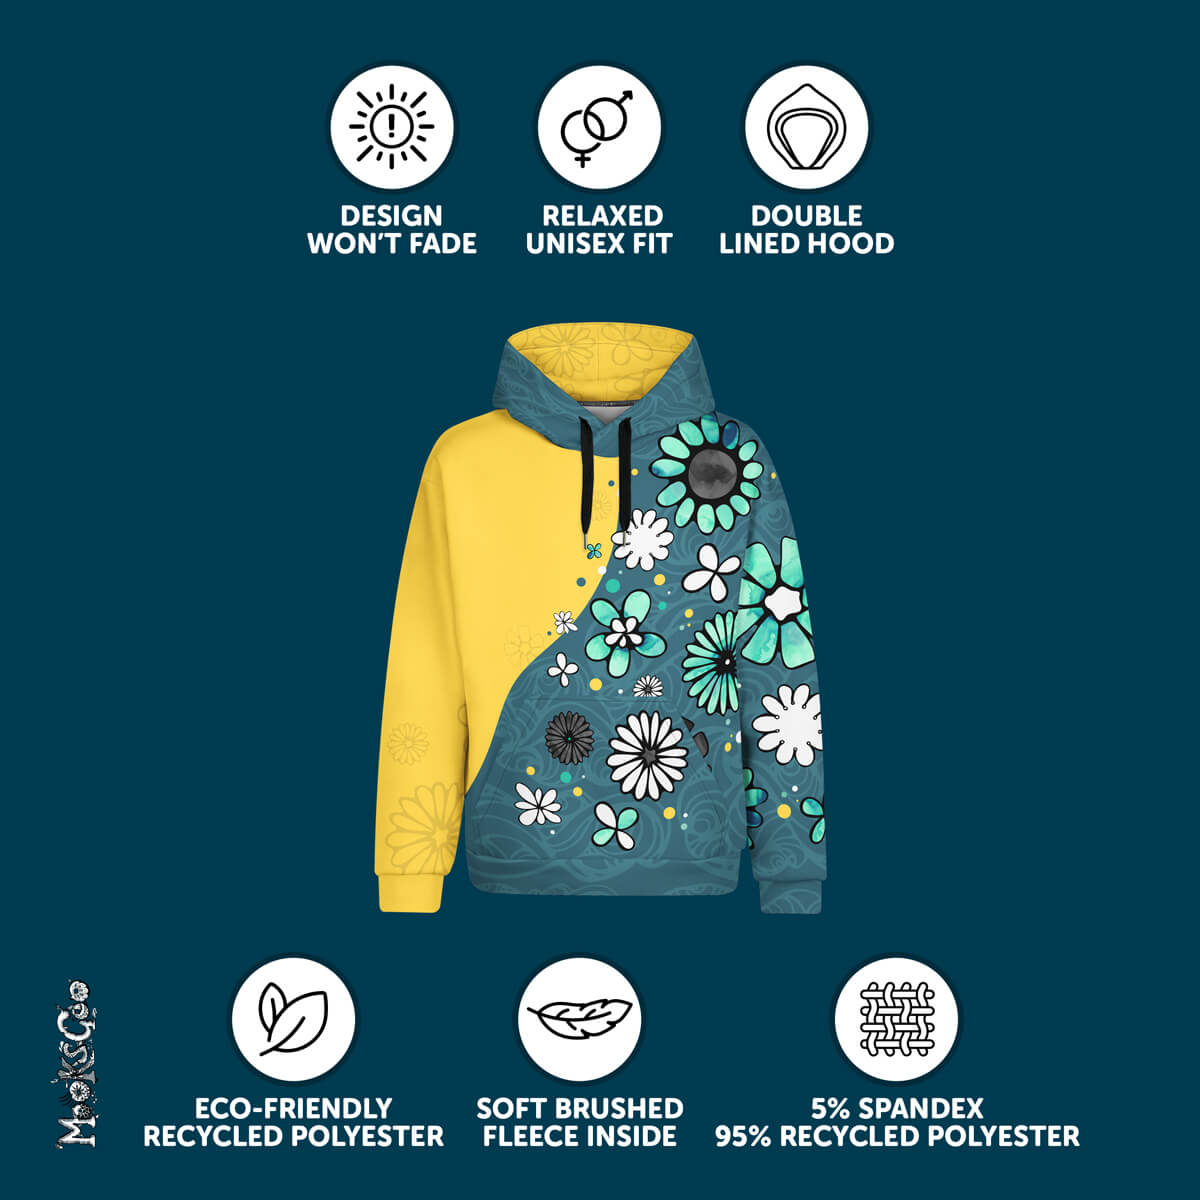 Benefits of the teal and mustard yellow colour split recycled hoodie, including a design that won't fade, soft brushed fleece, and original artwork by MooksGoo